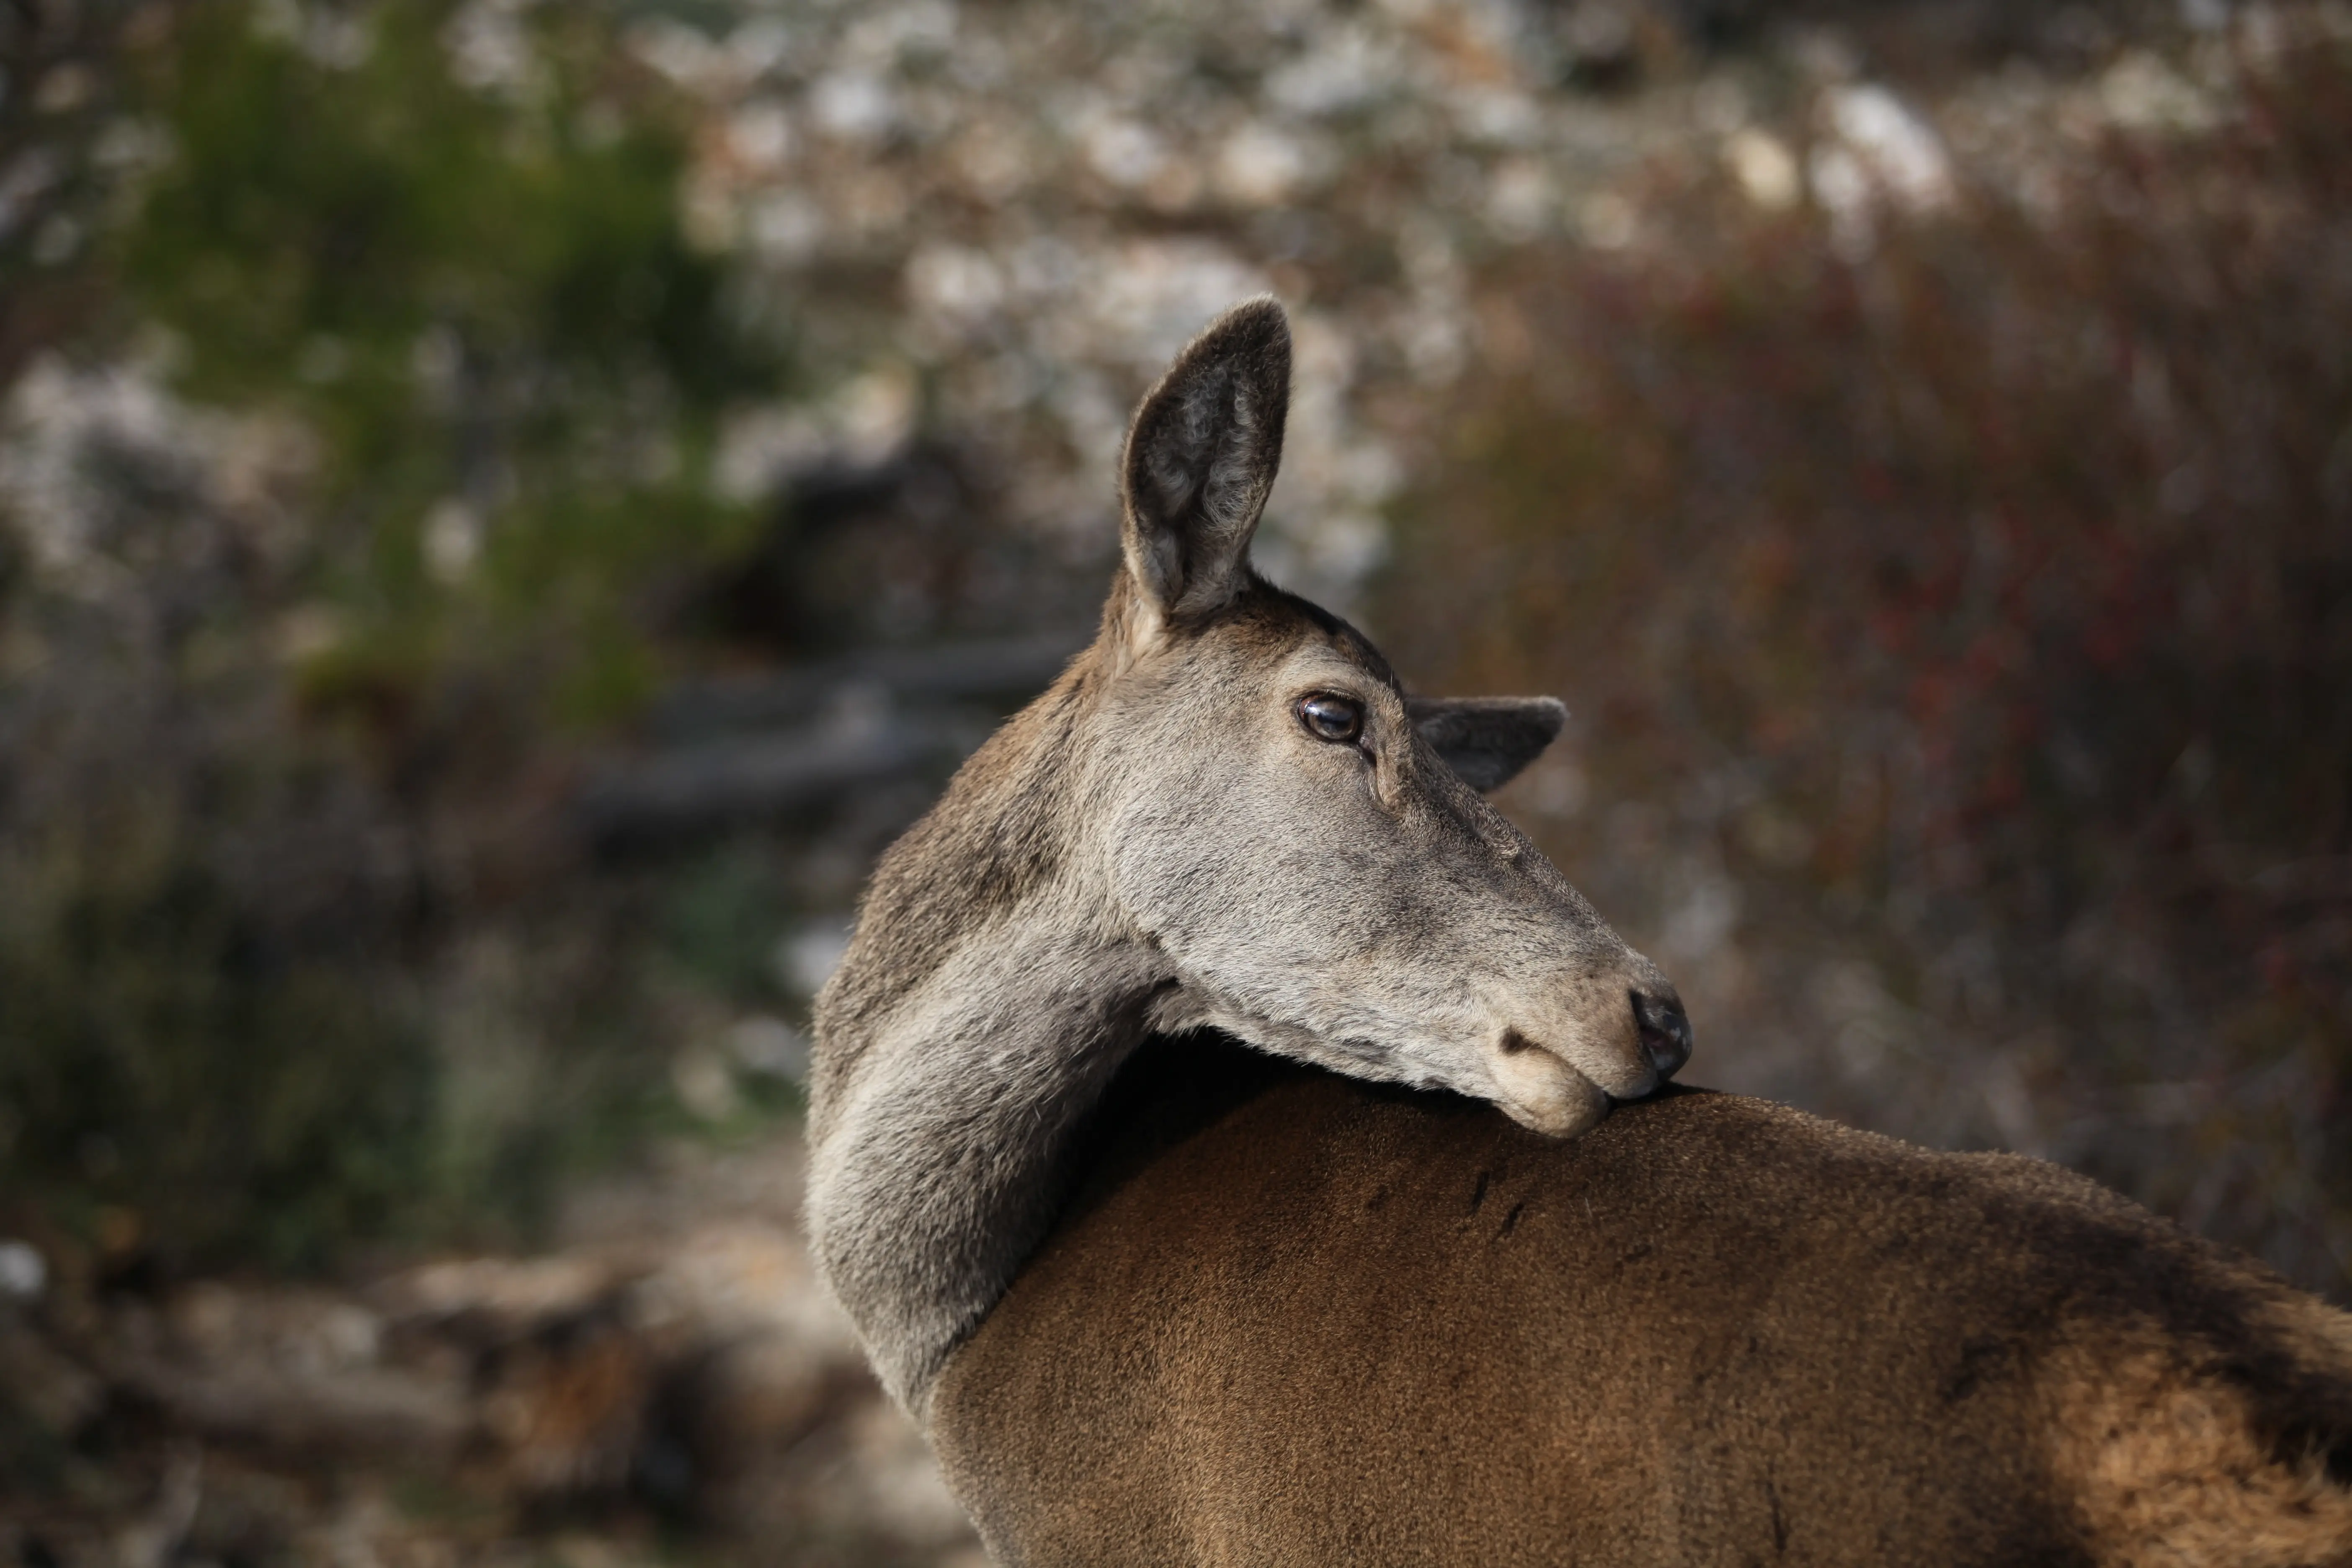 A deer with its head resting on its back. The animal has a brown fur coat and long ears, and it appears to be standing in an outdoor setting. Its snout is visible, as well as the white markings around its eyes.